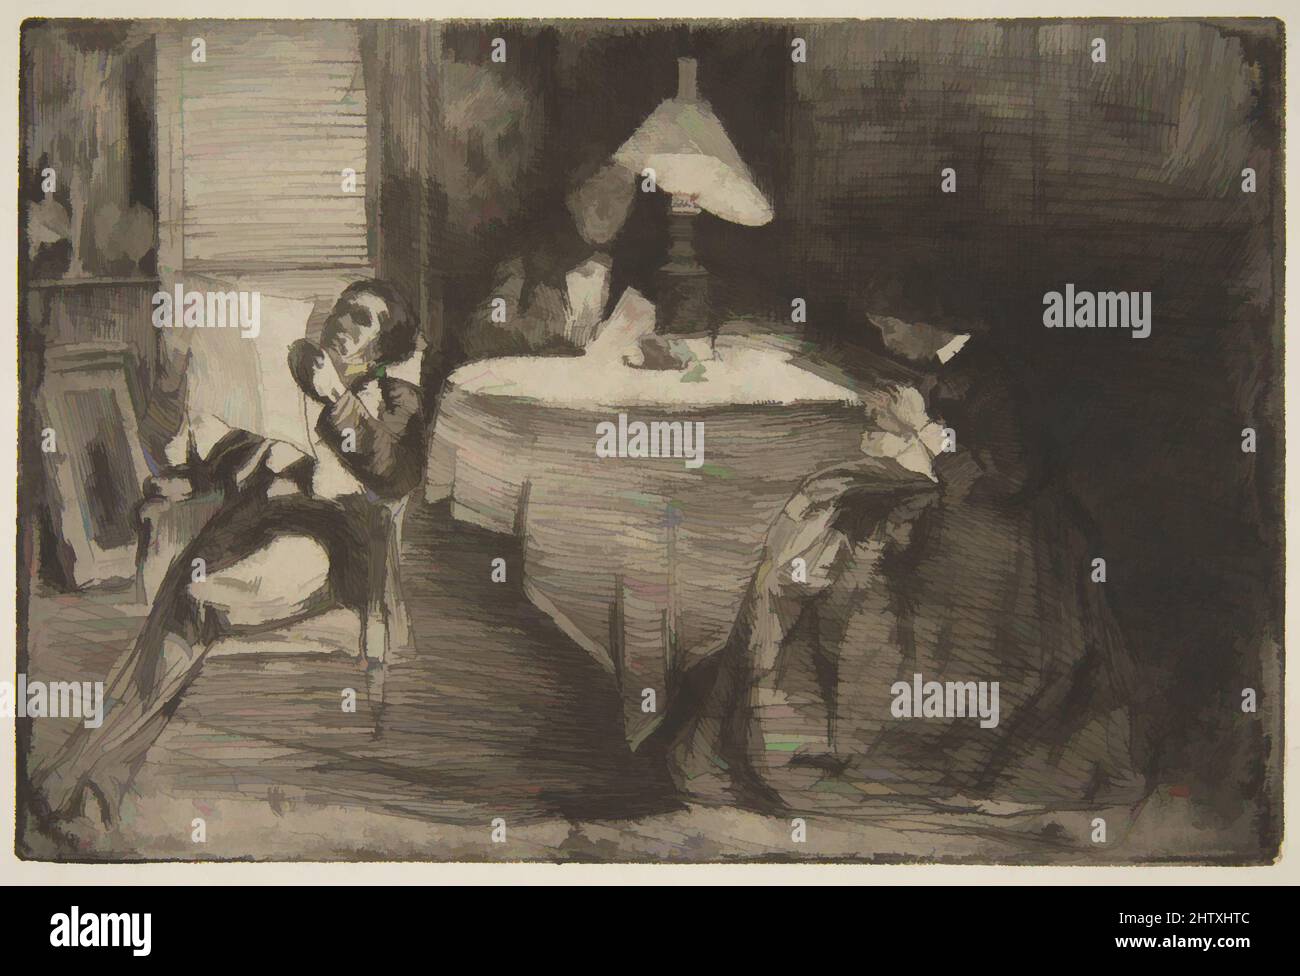 Art inspired by The Music Room, 1859, Etching; second state of four (Glasgow); Fine antique laid paper with a greenish cast, Plate: 5 11/16 x 8 1/2 in. (14.4 x 21.6 cm), Prints, James McNeill Whistler (American, Lowell, Massachusetts 1834–1903 London, Classic works modernized by Artotop with a splash of modernity. Shapes, color and value, eye-catching visual impact on art. Emotions through freedom of artworks in a contemporary way. A timeless message pursuing a wildly creative new direction. Artists turning to the digital medium and creating the Artotop NFT Stock Photo